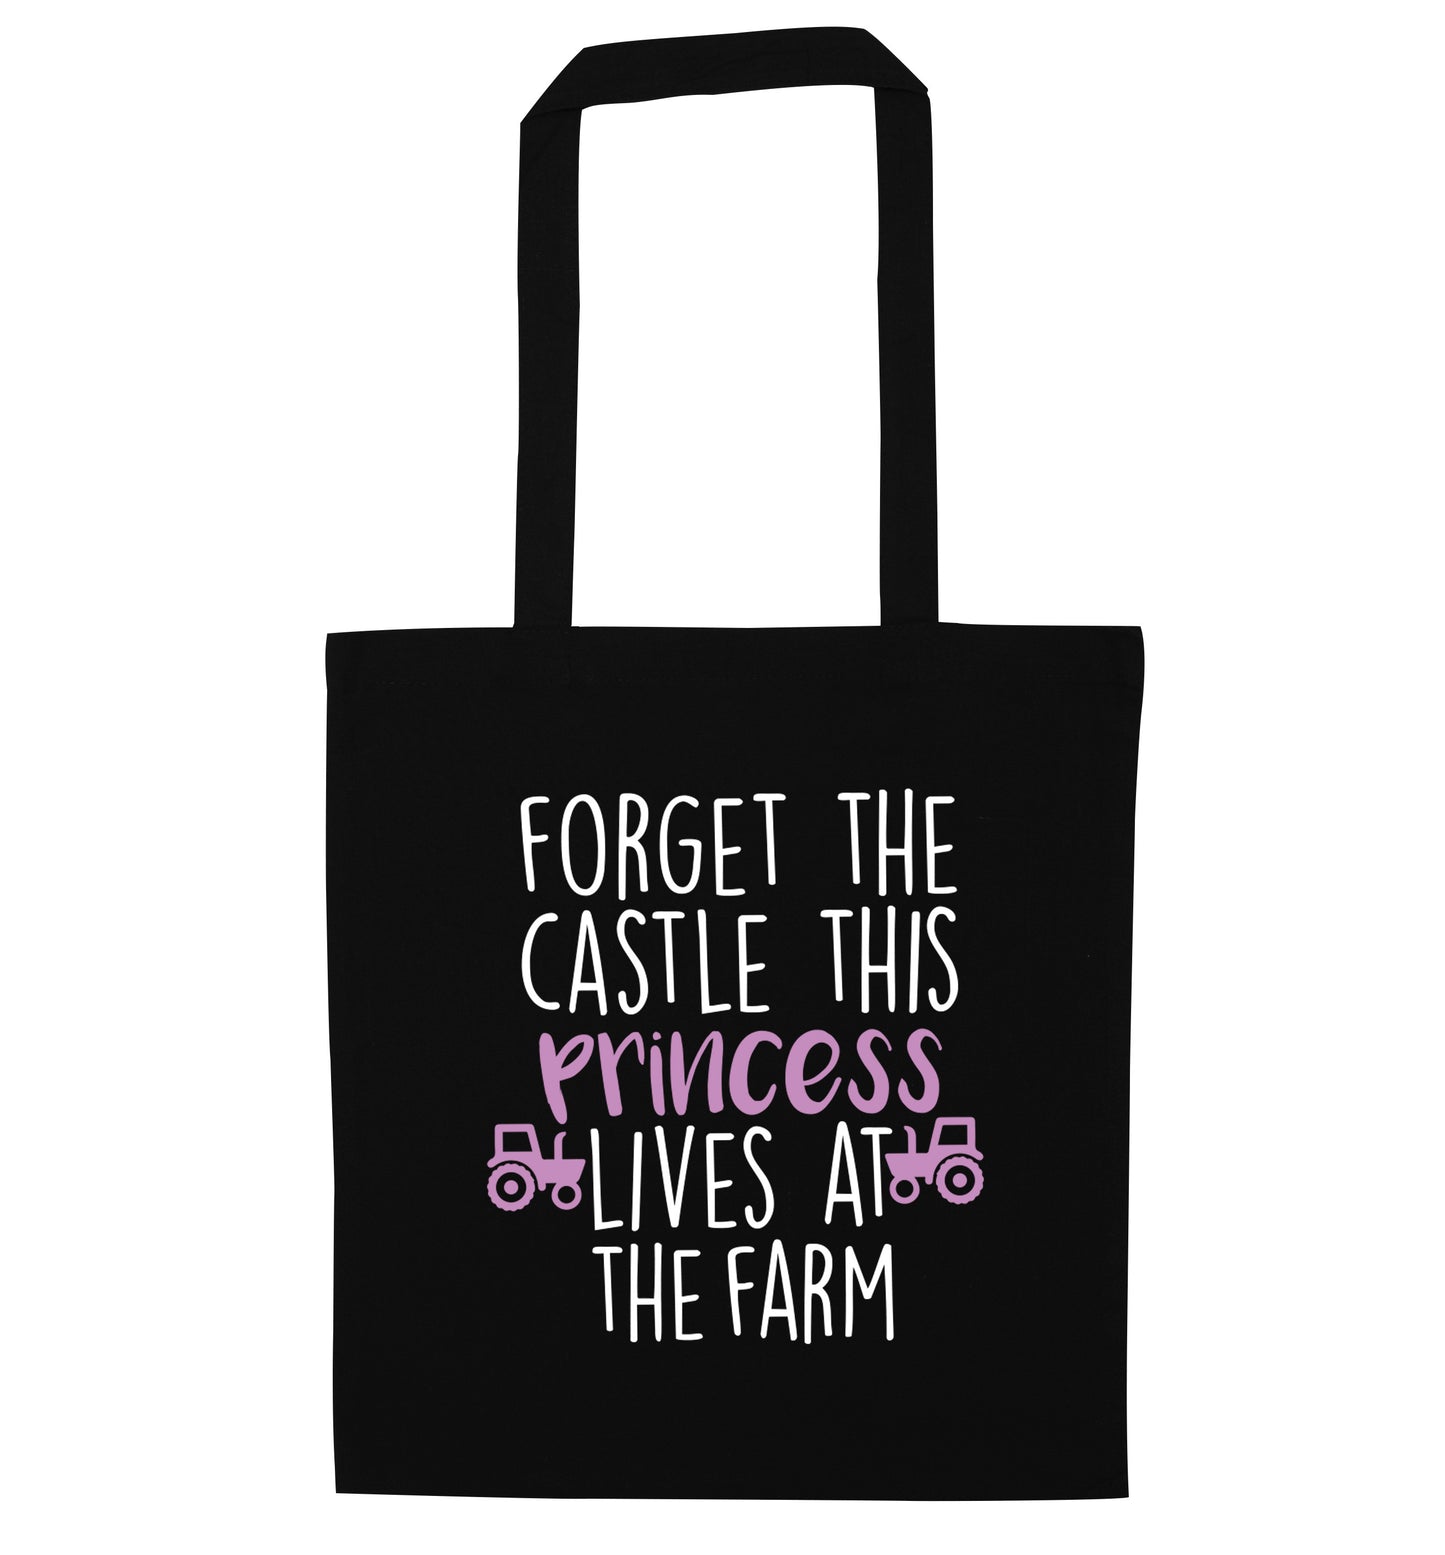 Forget the castle this princess lives at the farm black tote bag